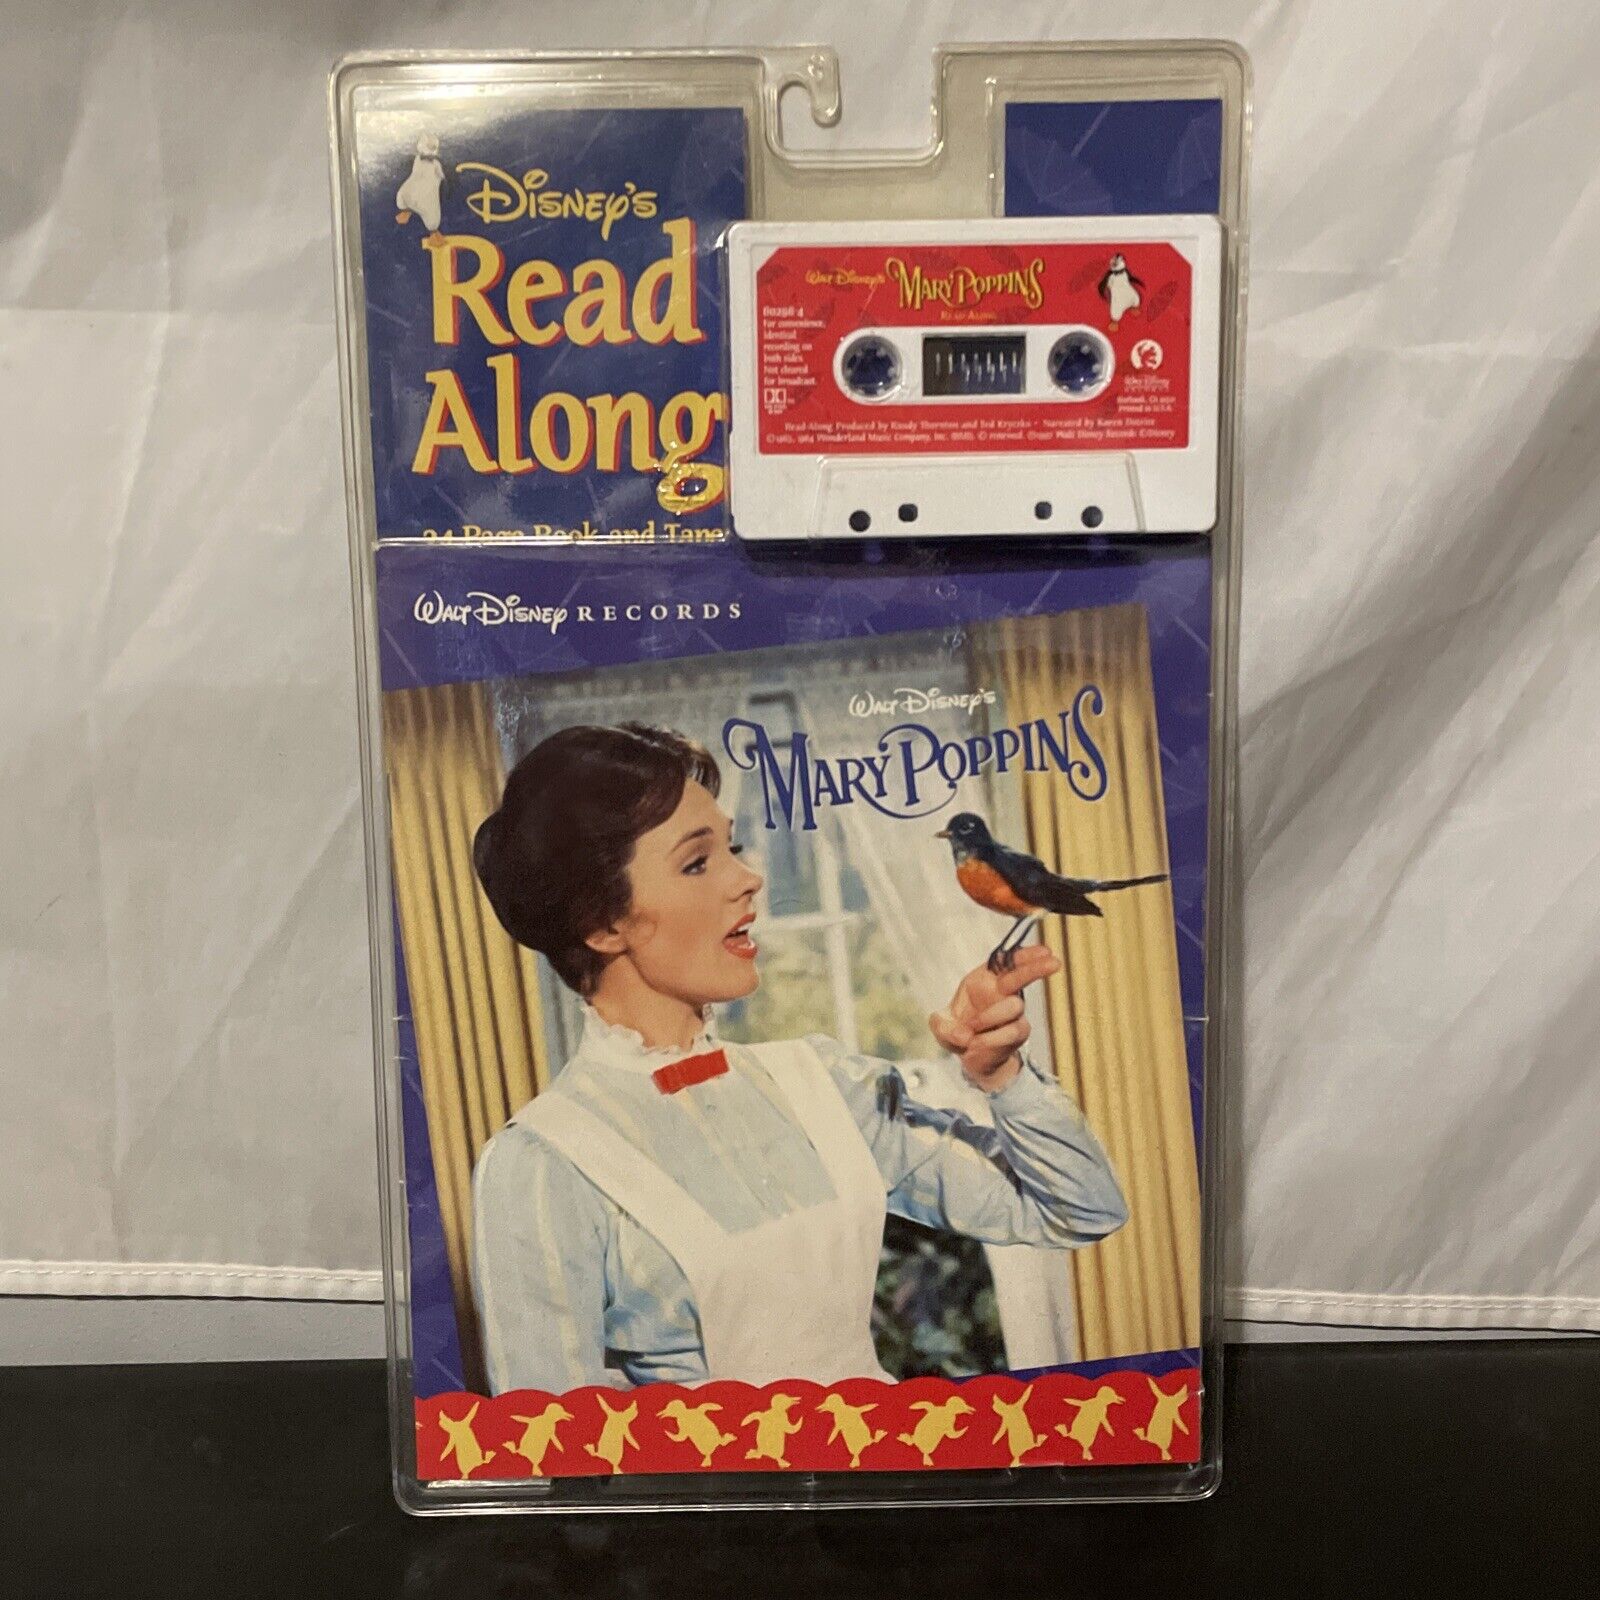 Disney's “Mary Poppins” Read Along Book and Cassette Tape Vintage Disney NIB